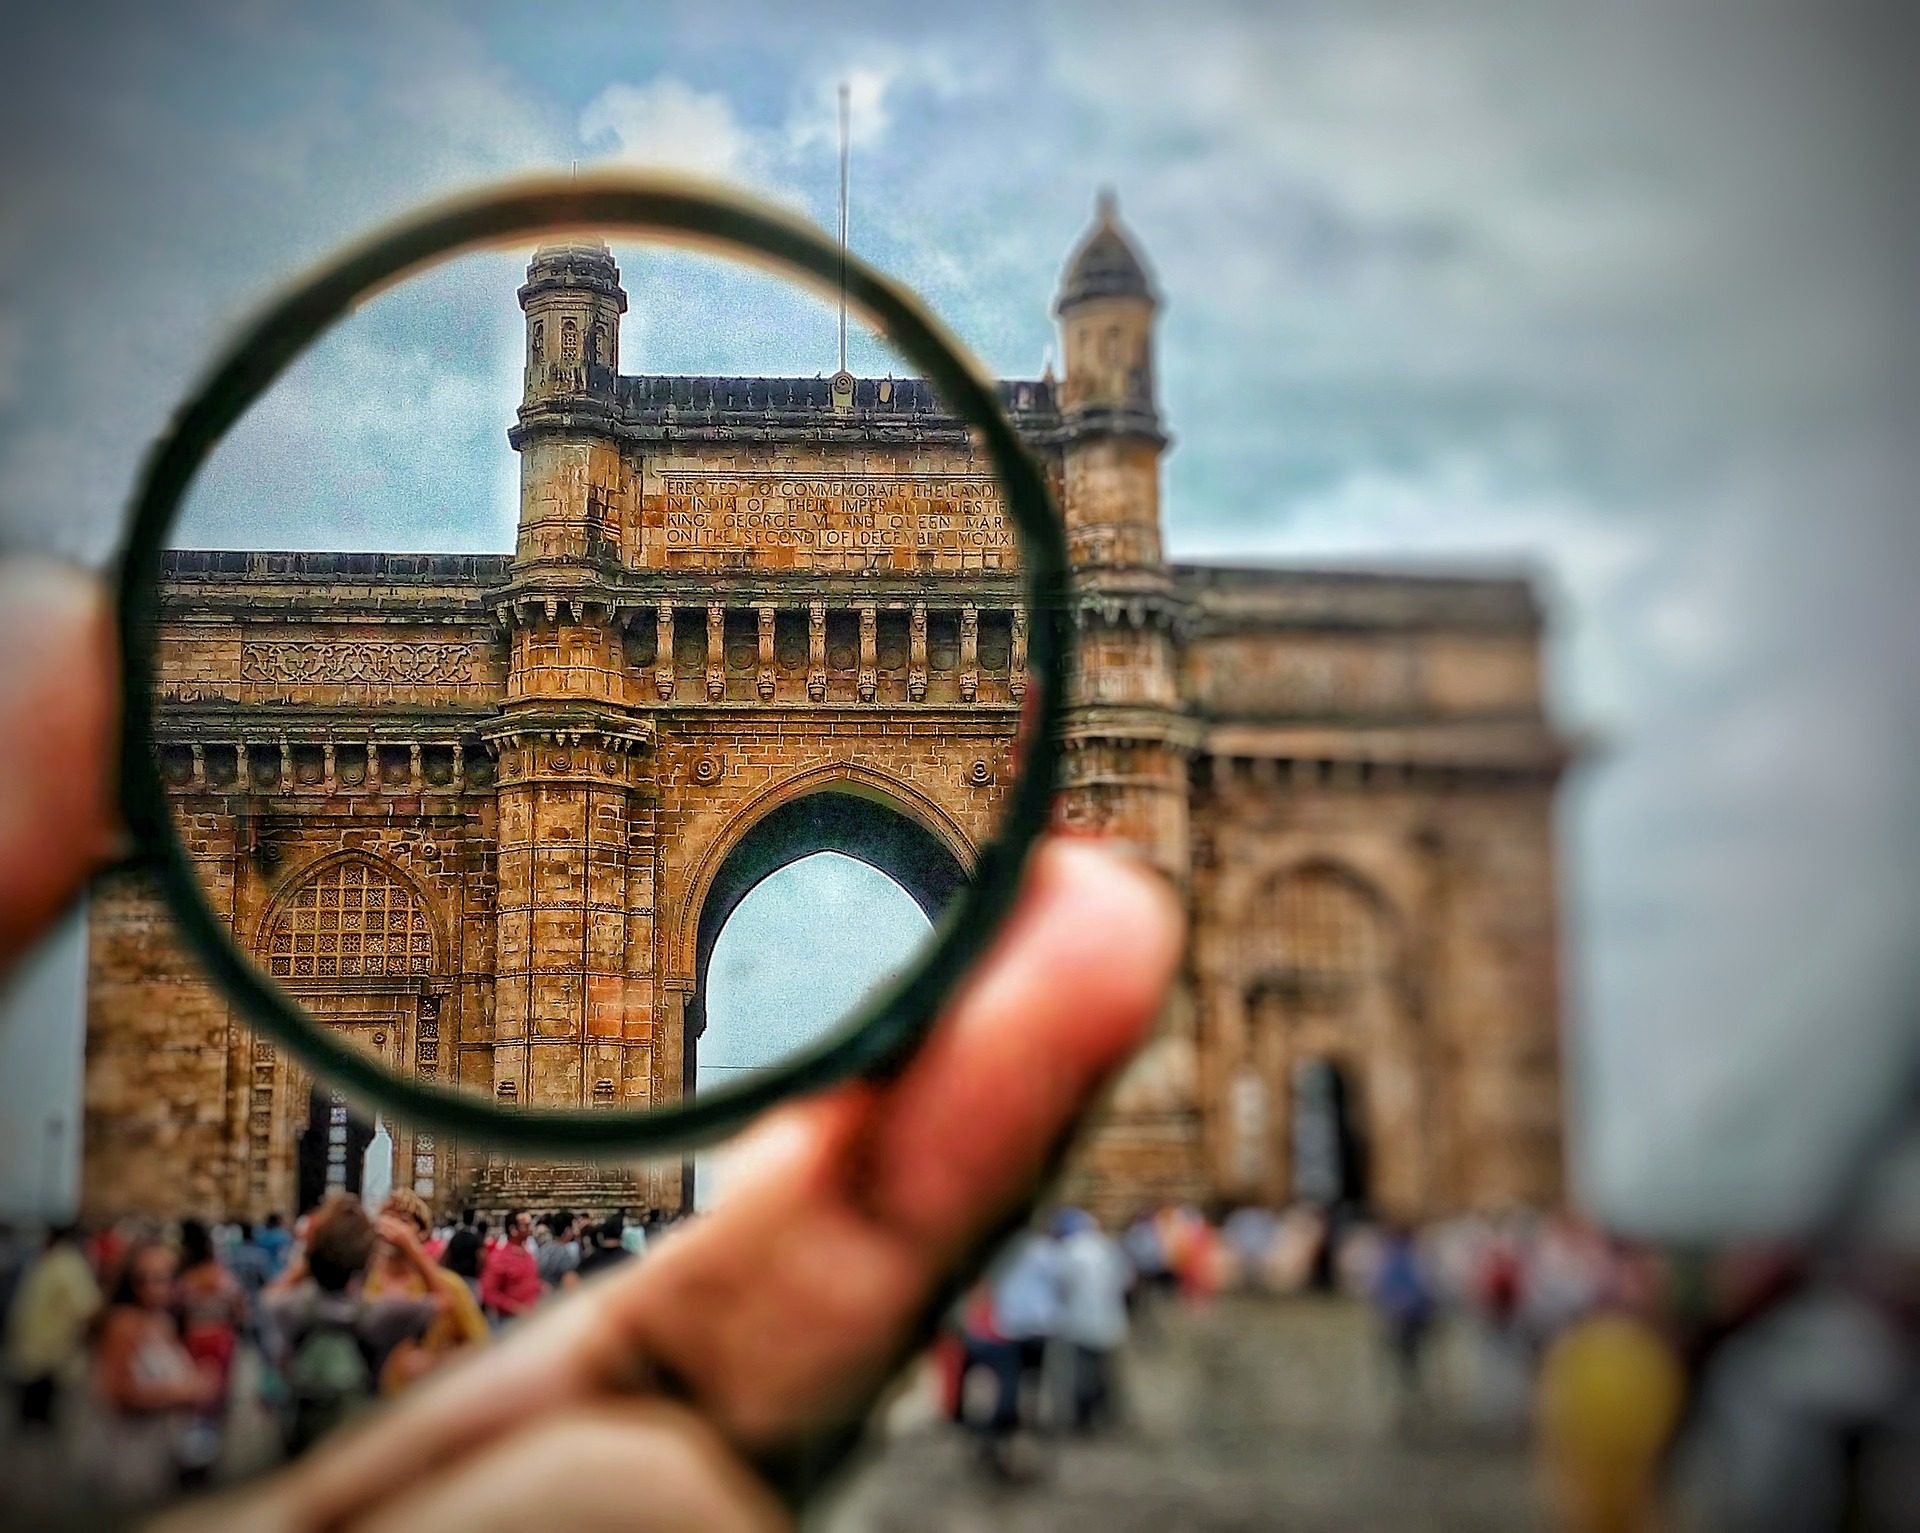 Top spots for a photo in Mumbai﻿, India